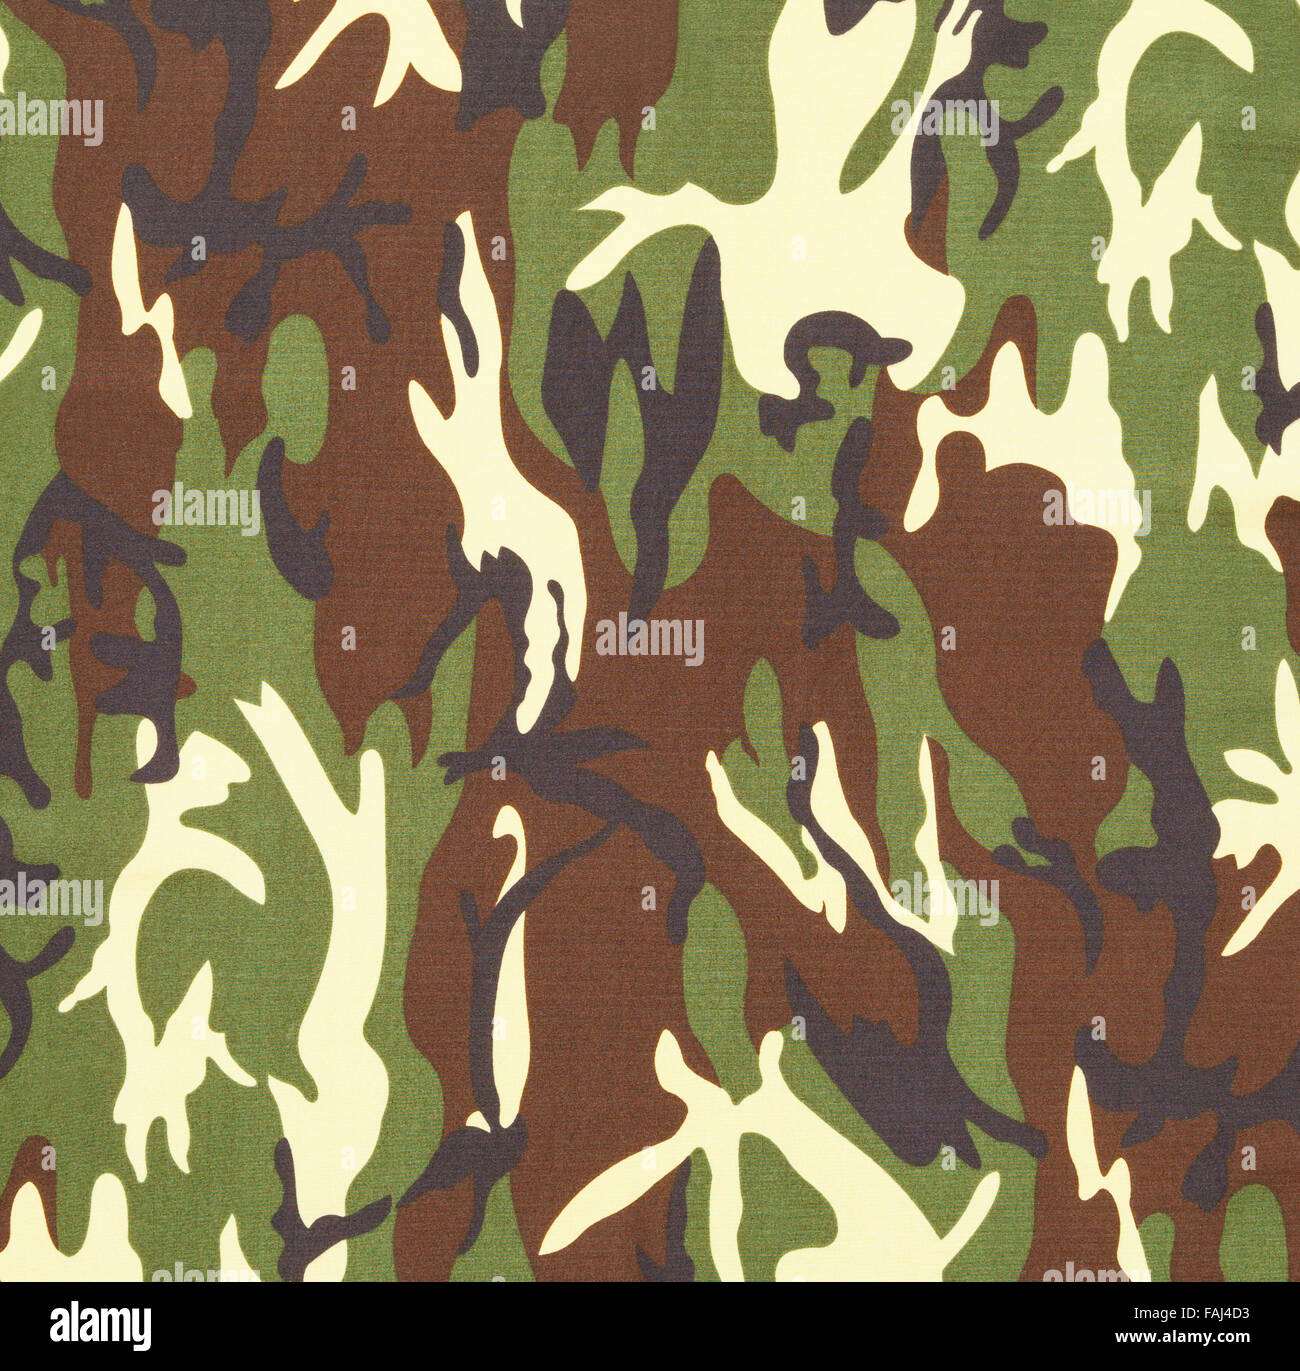 Army Camouflage Pattern Isolated on a White Background. Stock Photo